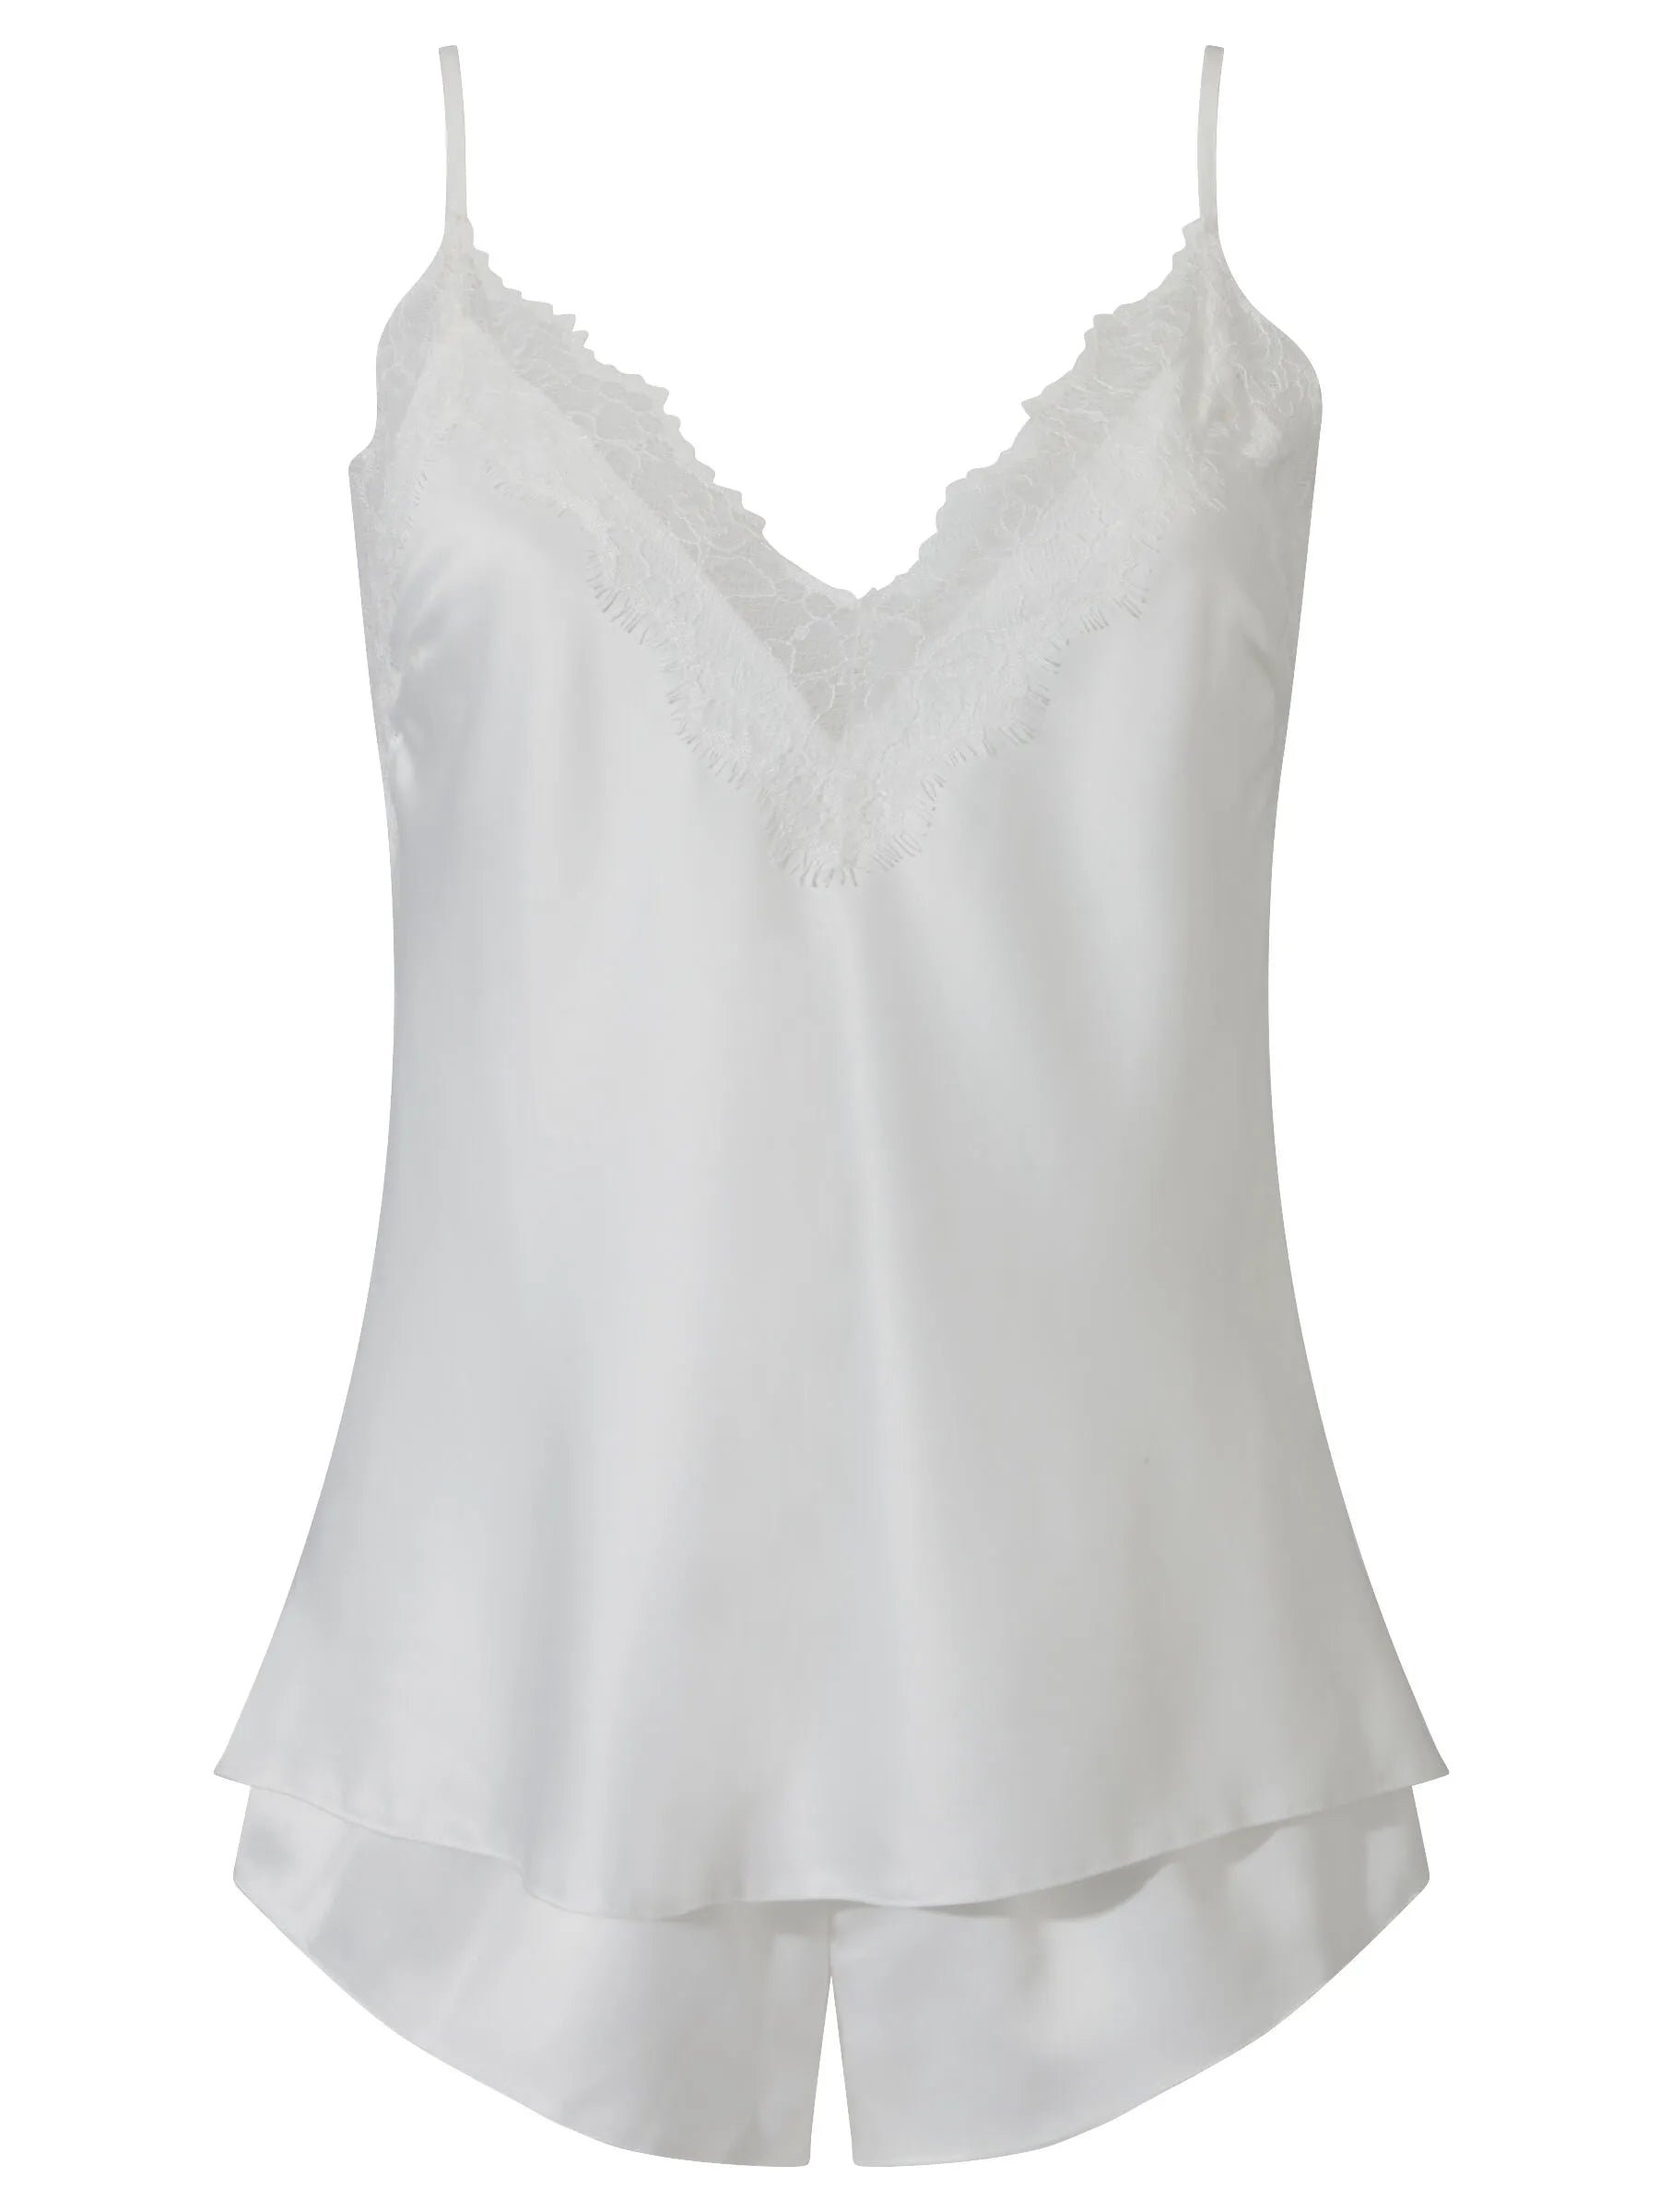 Cerise Cami Set Ivory from Ann Summers Image 03